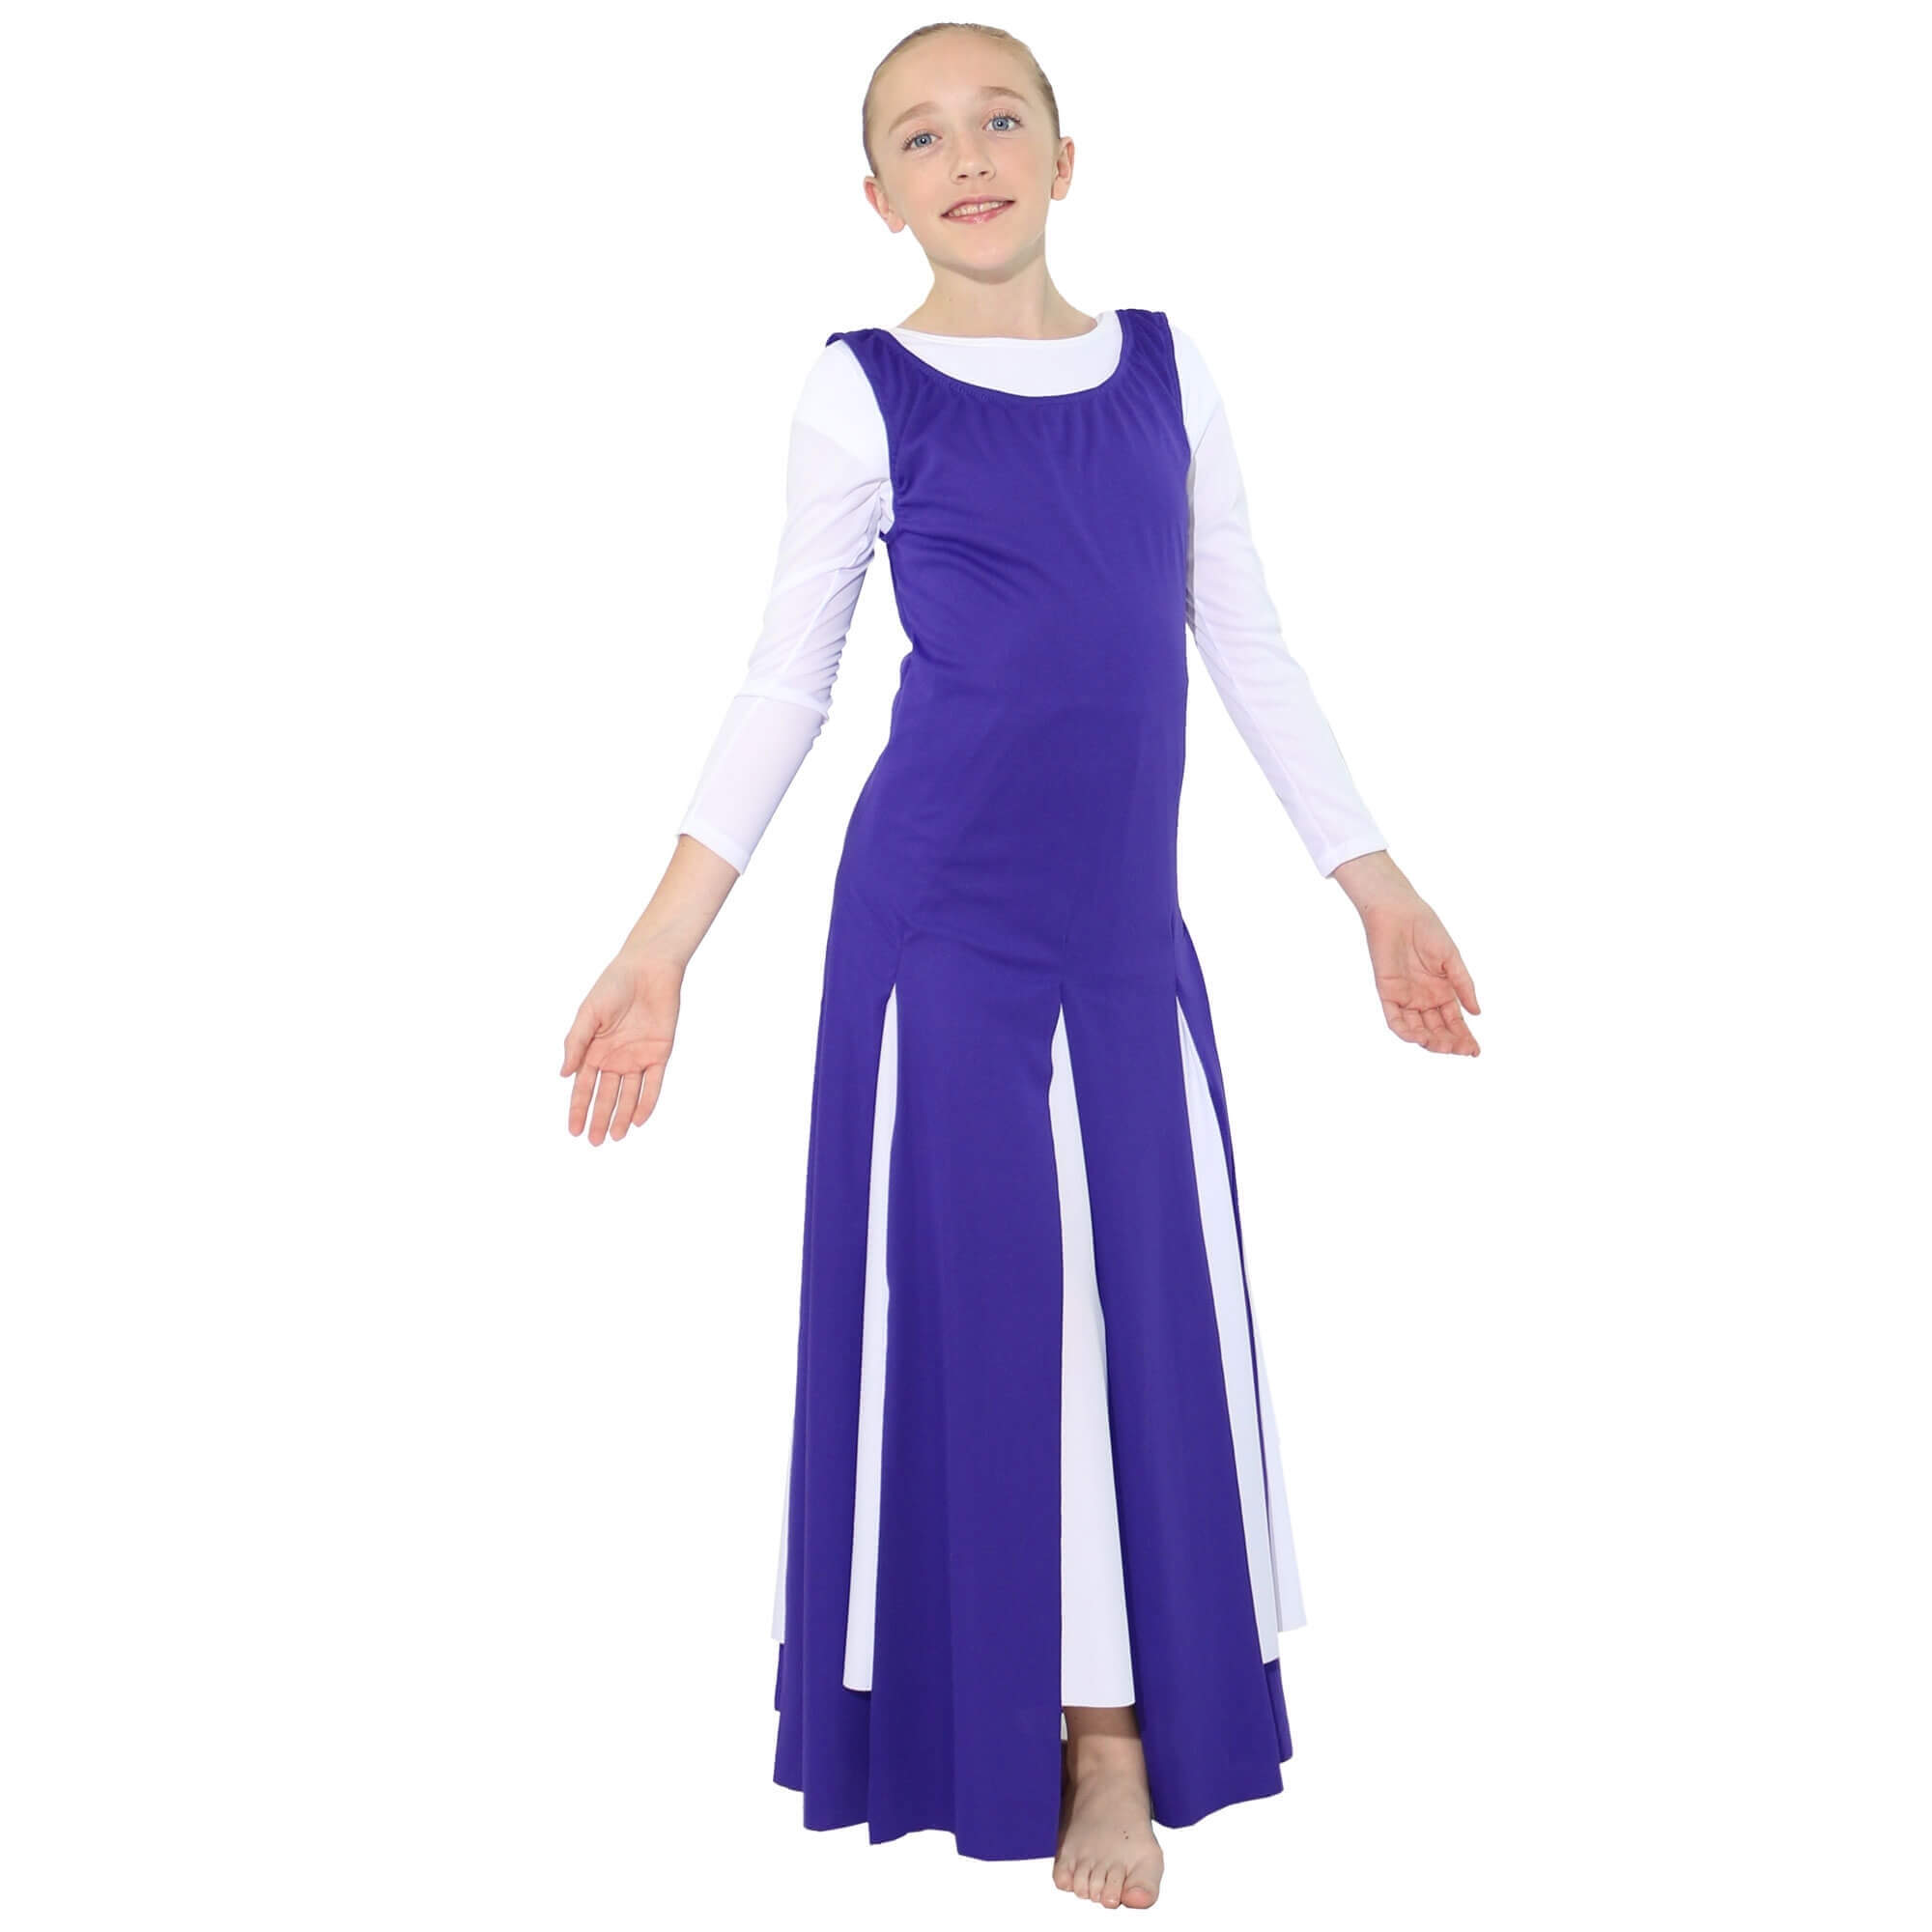 Danzcue Child Praise Dance Paneled Tunic (white dress not included) - Click Image to Close